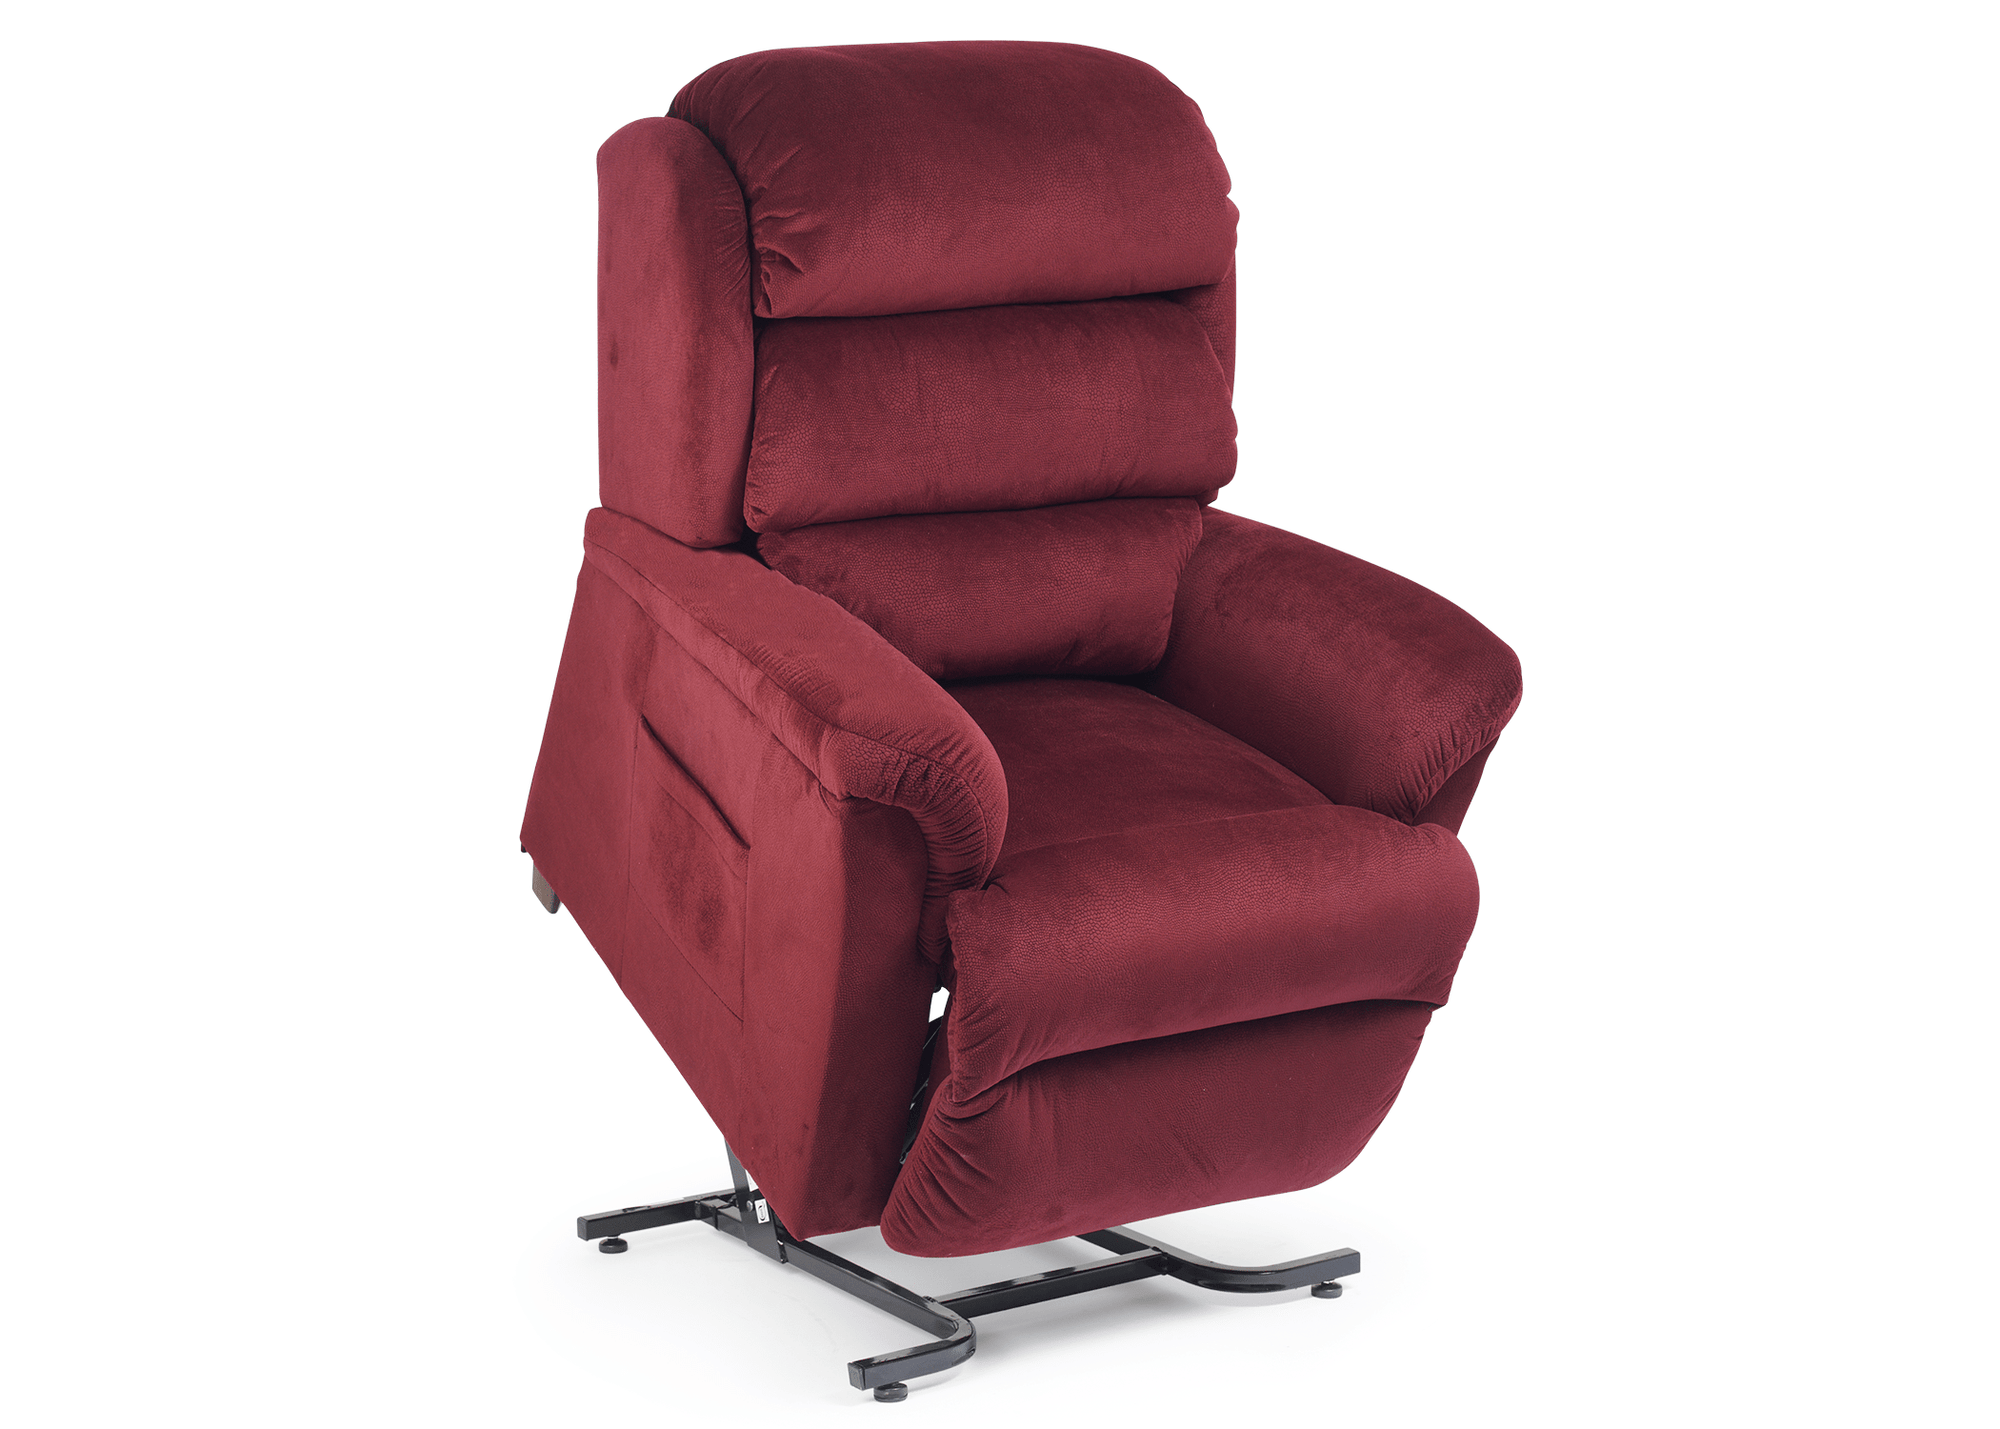 ULTRACOMFORT 3-Position Lift Chair Scrumptious Tuscan UltraComfort UC549-M Mira 1 Zone Simple Comfort 3 Position Lift Chair